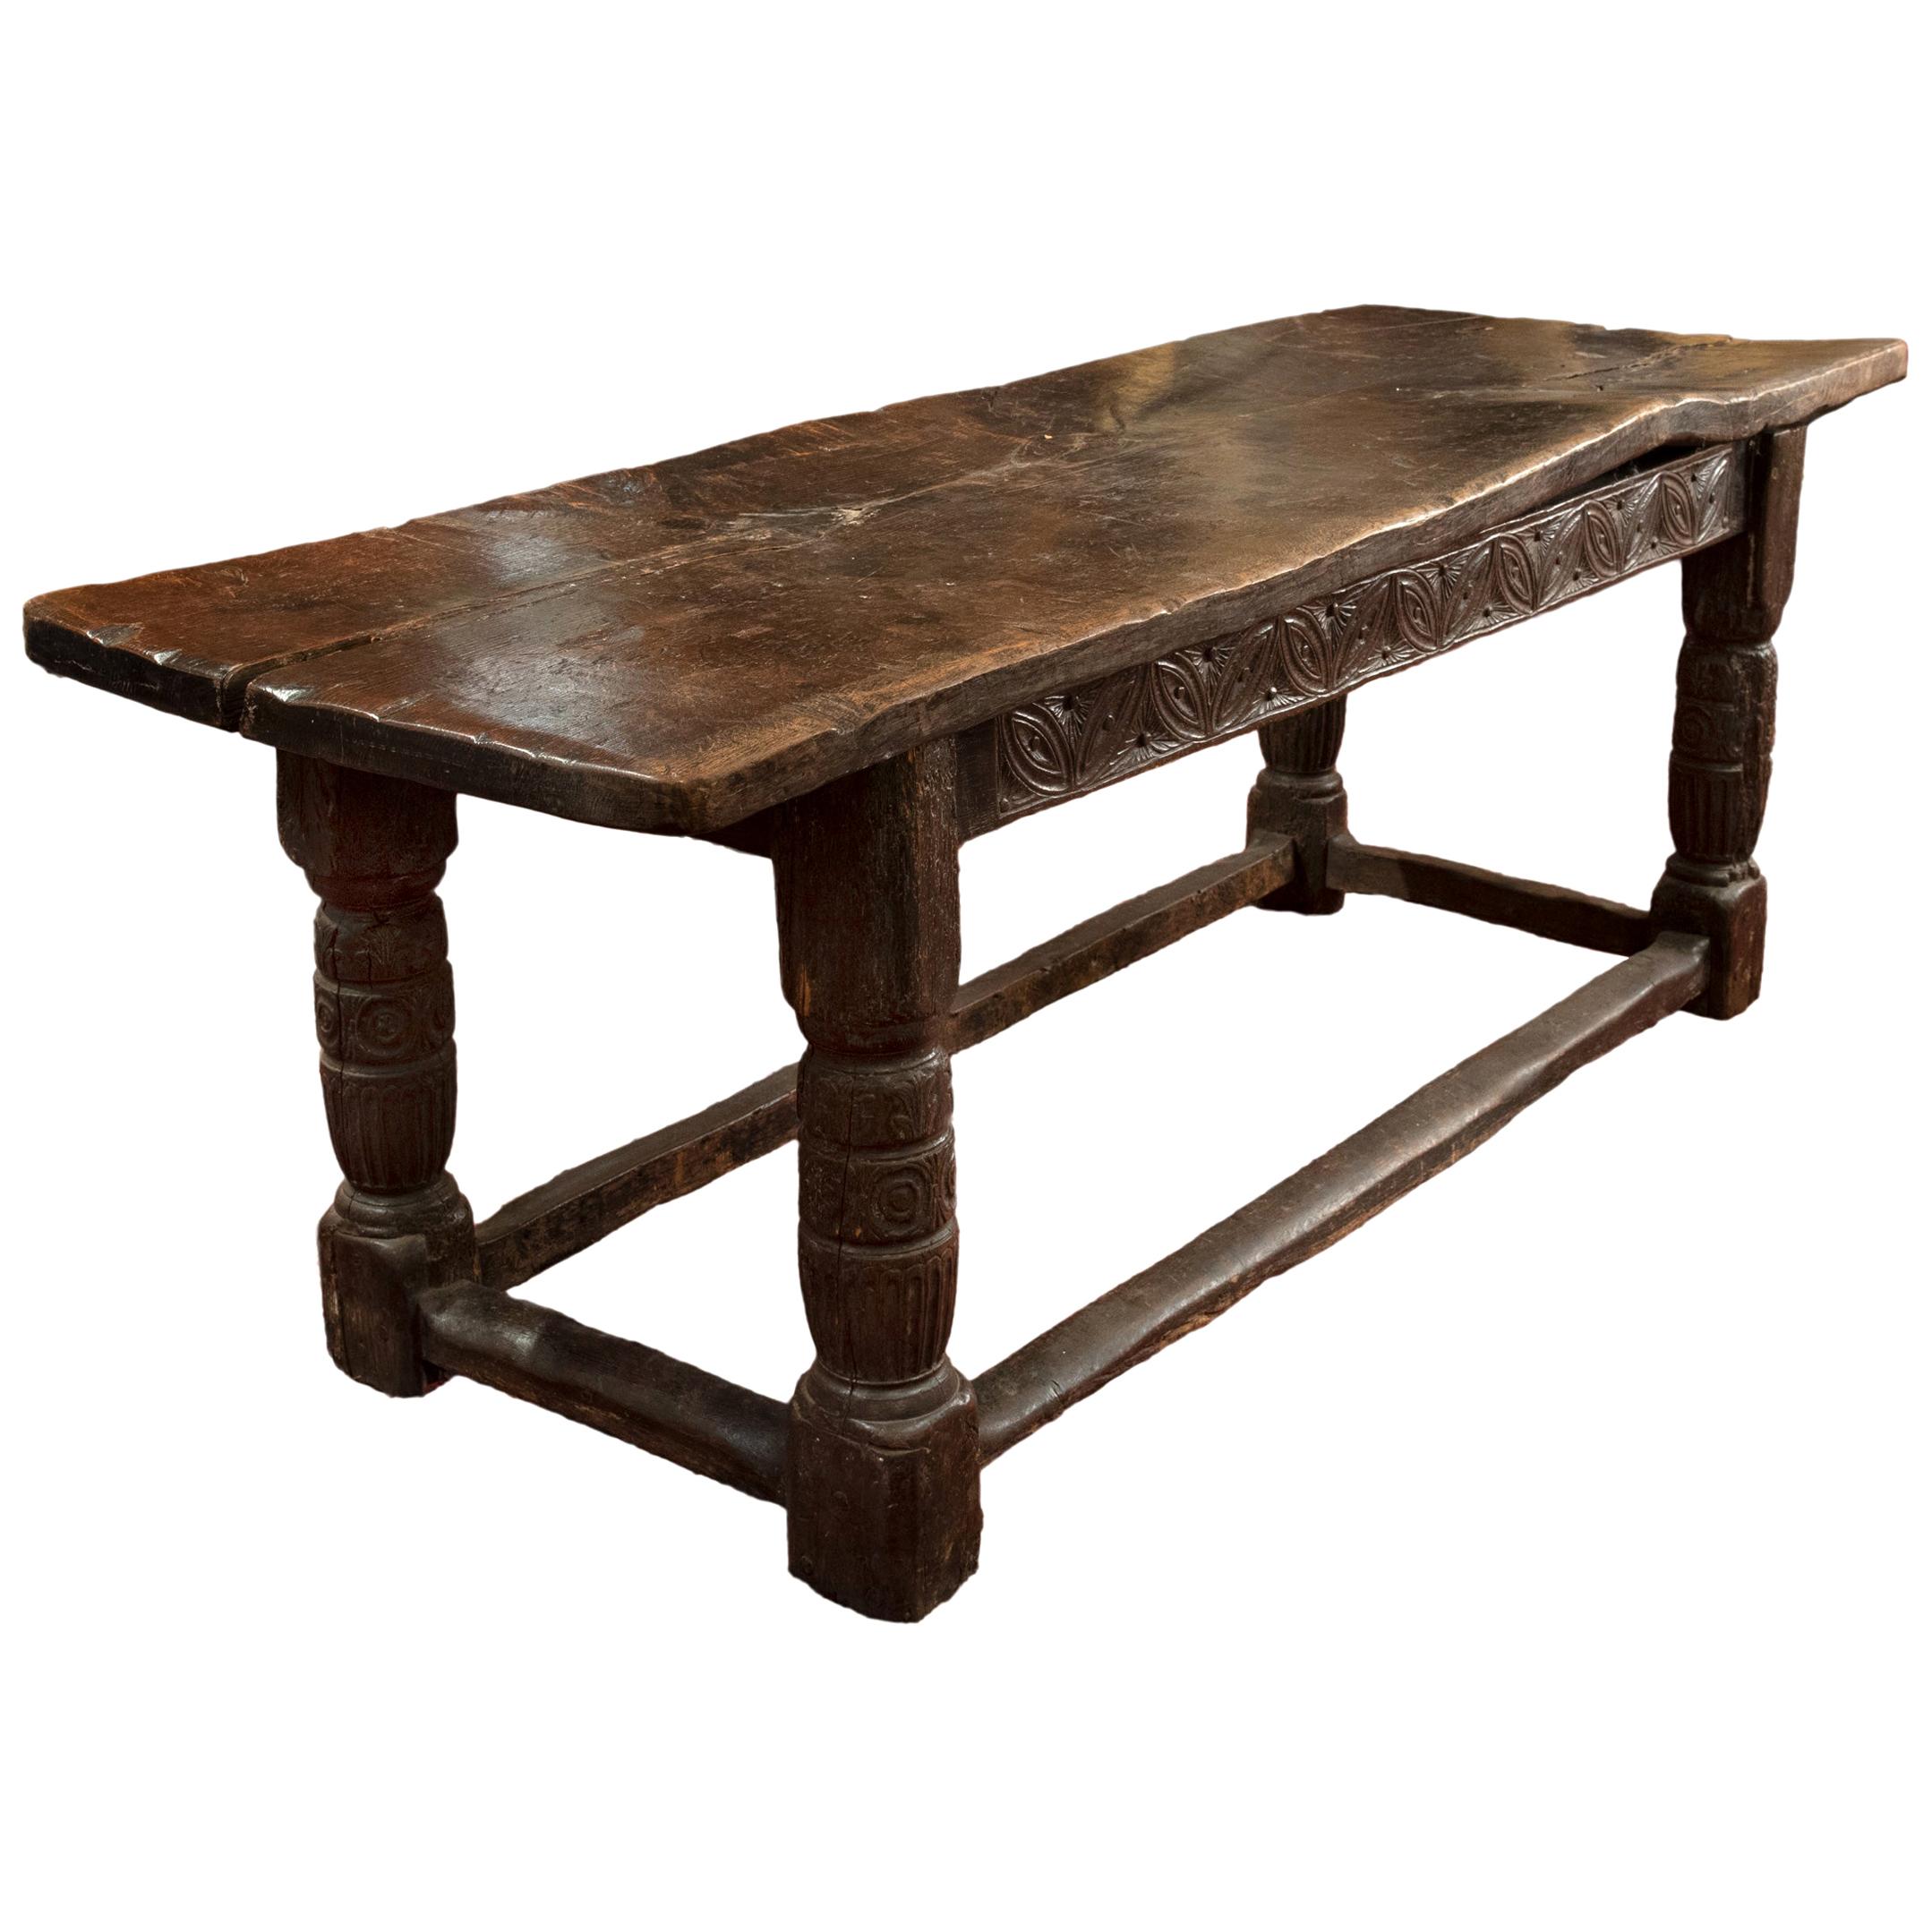 16th Century Tudor Carved Oak Refectory Table with Plank Top and Carved Base